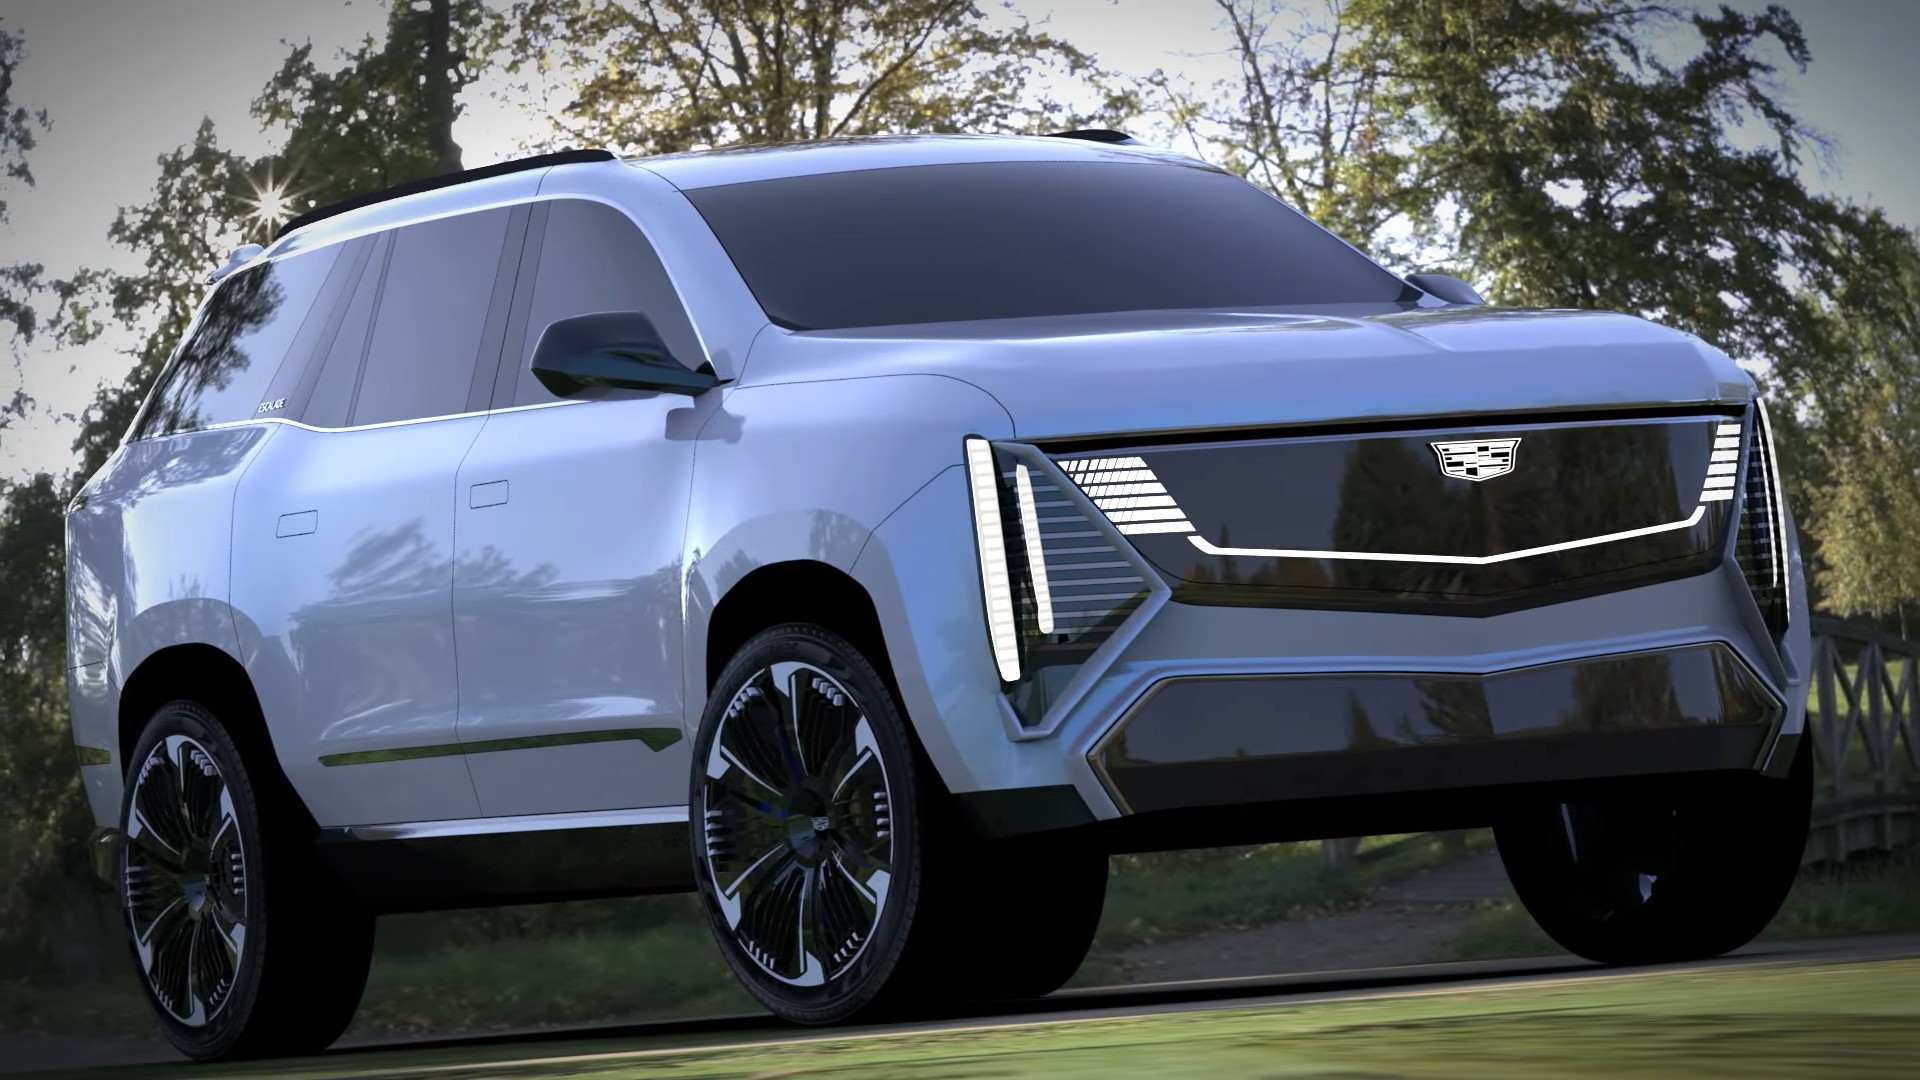 2024 Cadillac Escalade IQ Imagined With New Design Language and Dark or